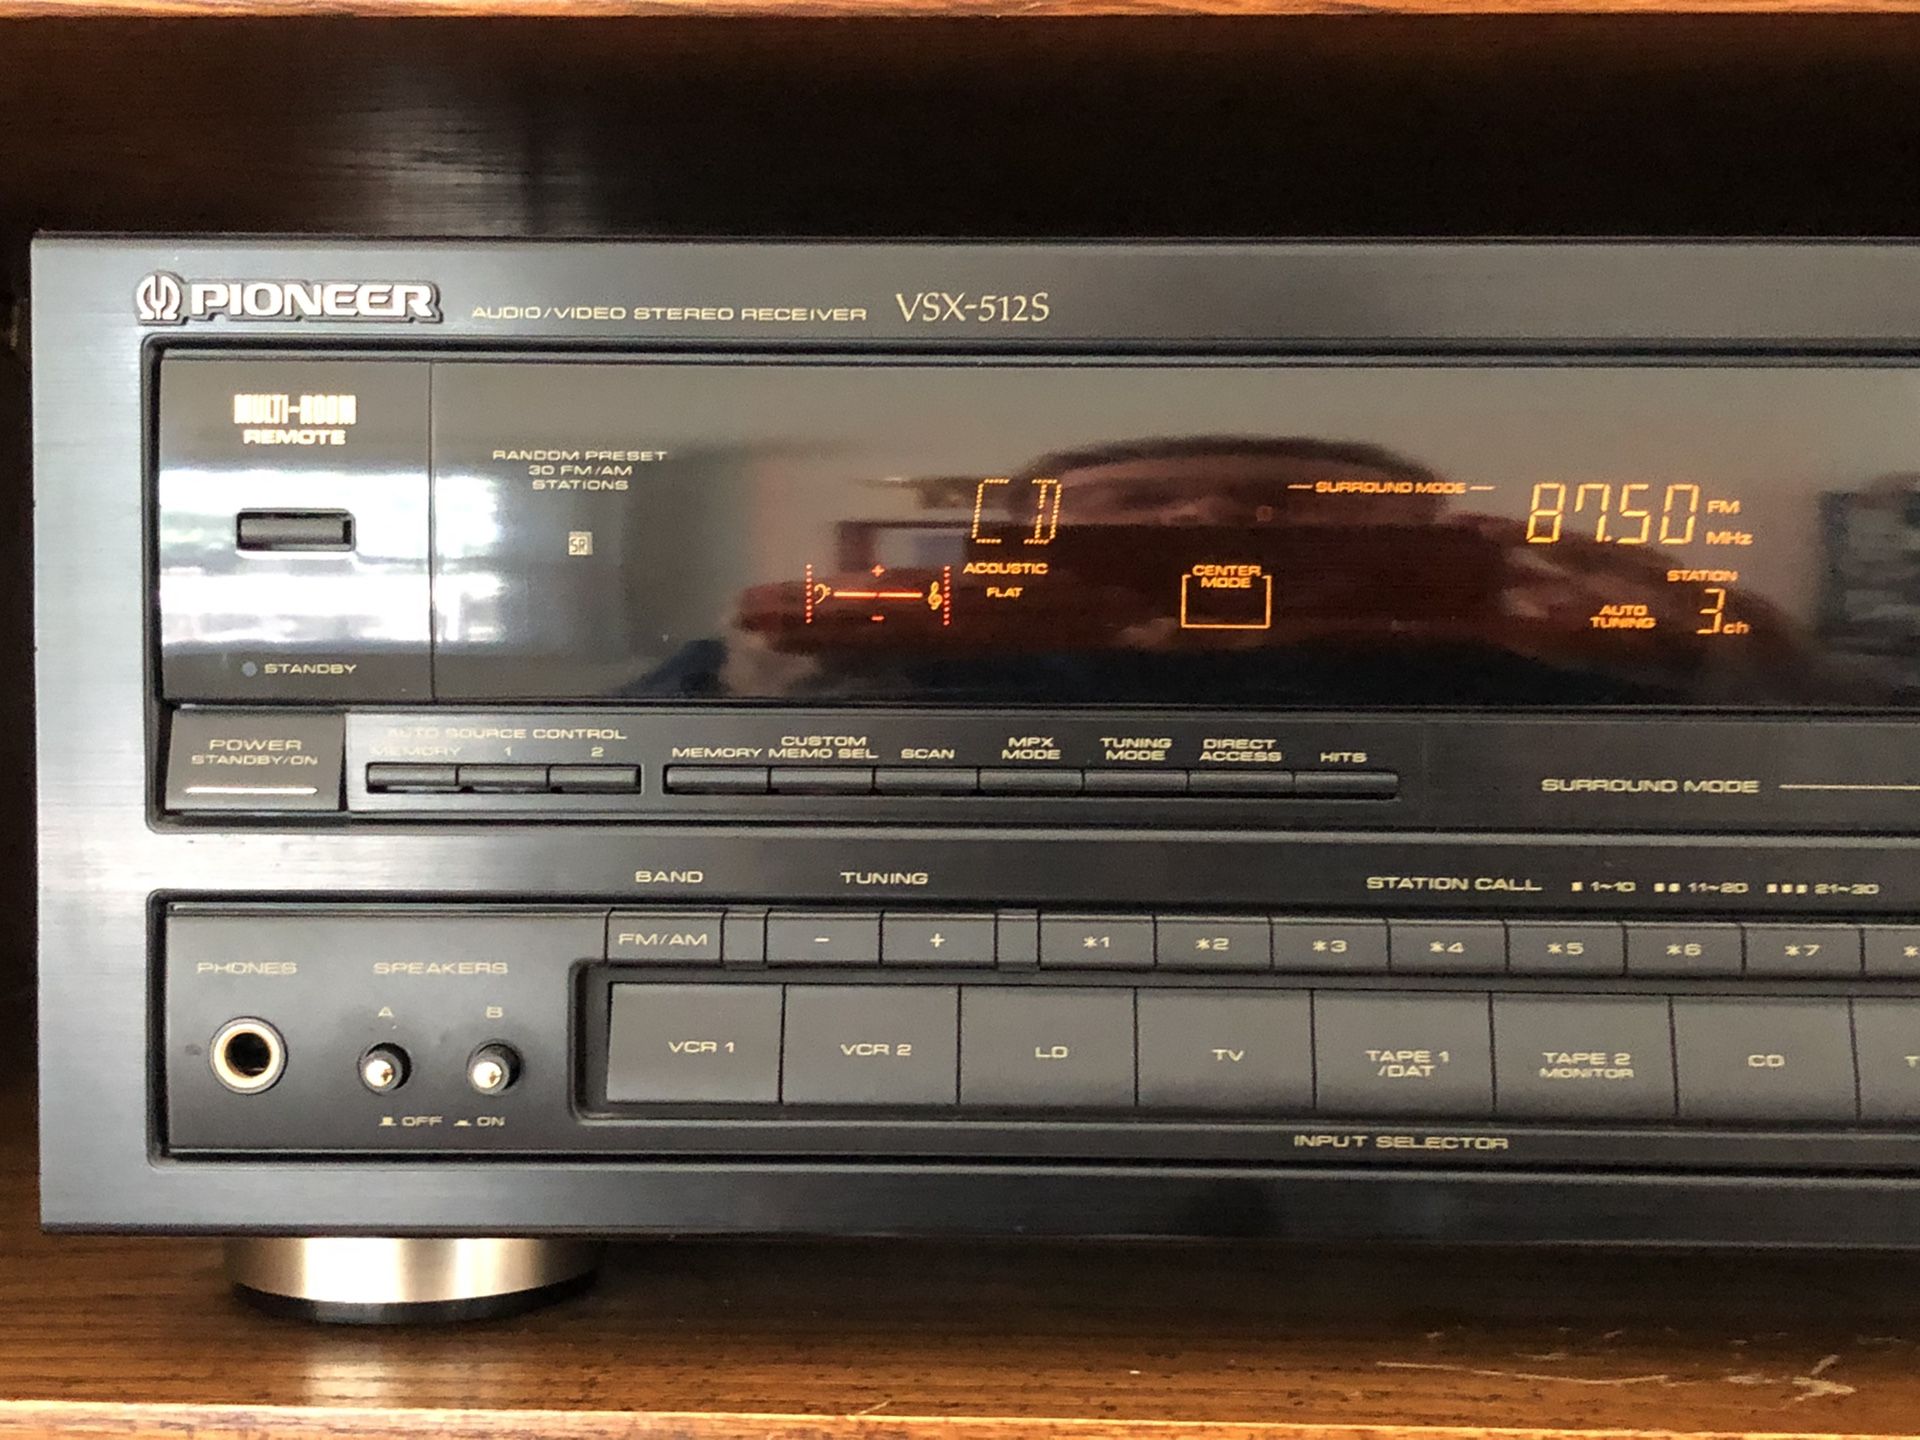 Pioneer VSX-512S 5.1 Channel Audio/Video Stereo Receiver.